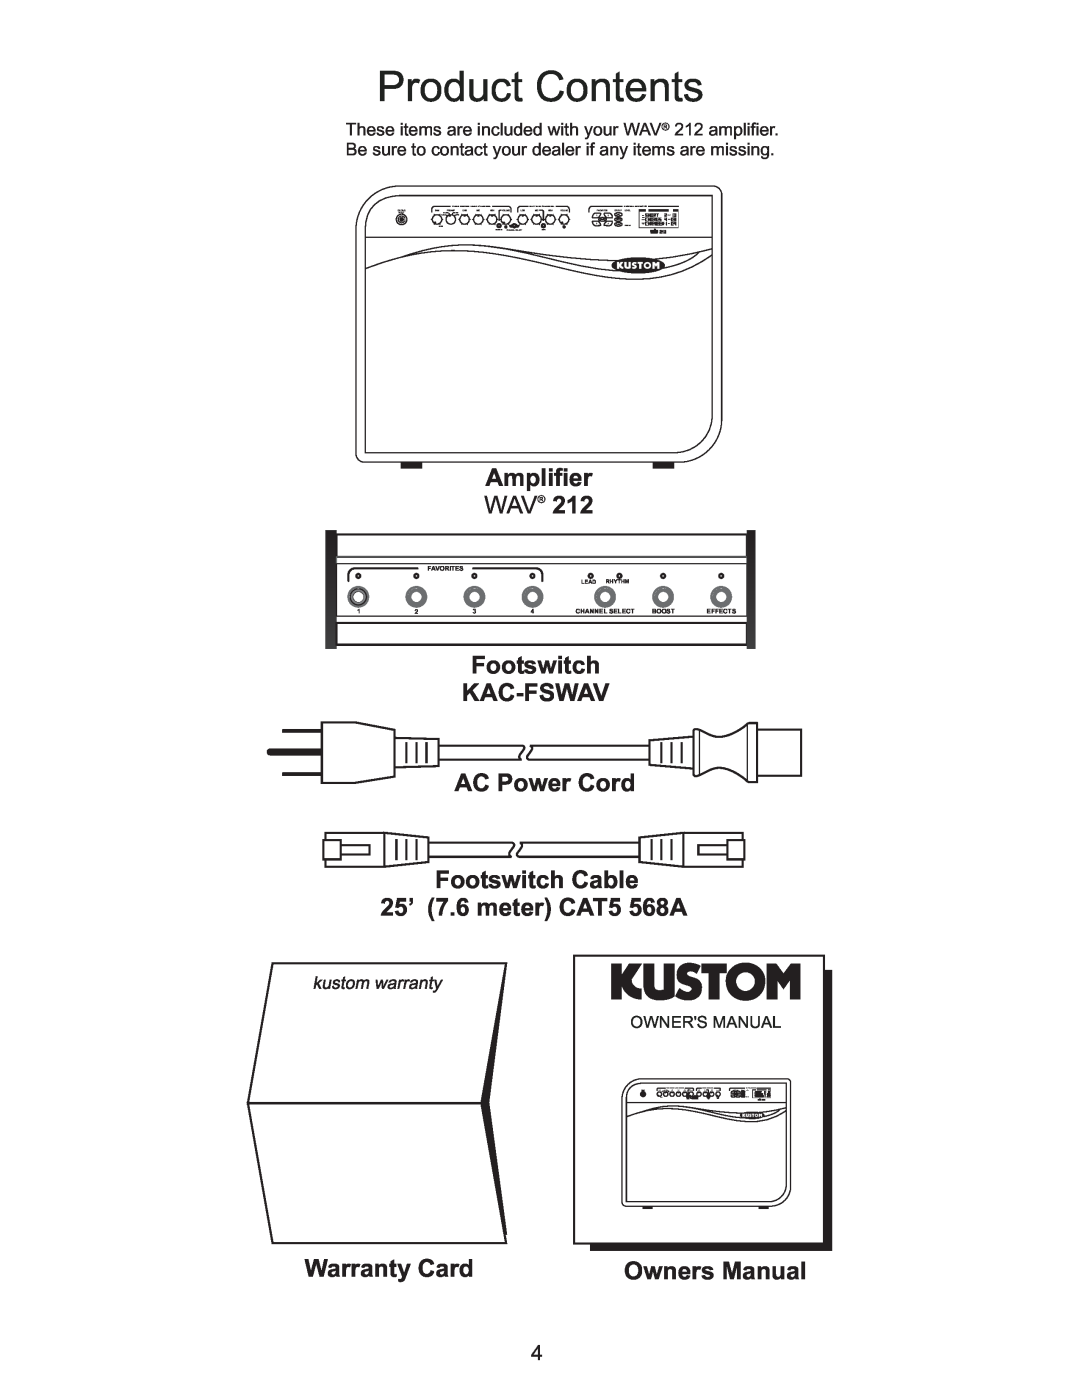 Kustom WAV 212 Product Contents, Amplifier, Footswitch KAC-FSWAV AC Power Cord, Footswitch Cable 25’ 7.6 meter CAT5 568A 